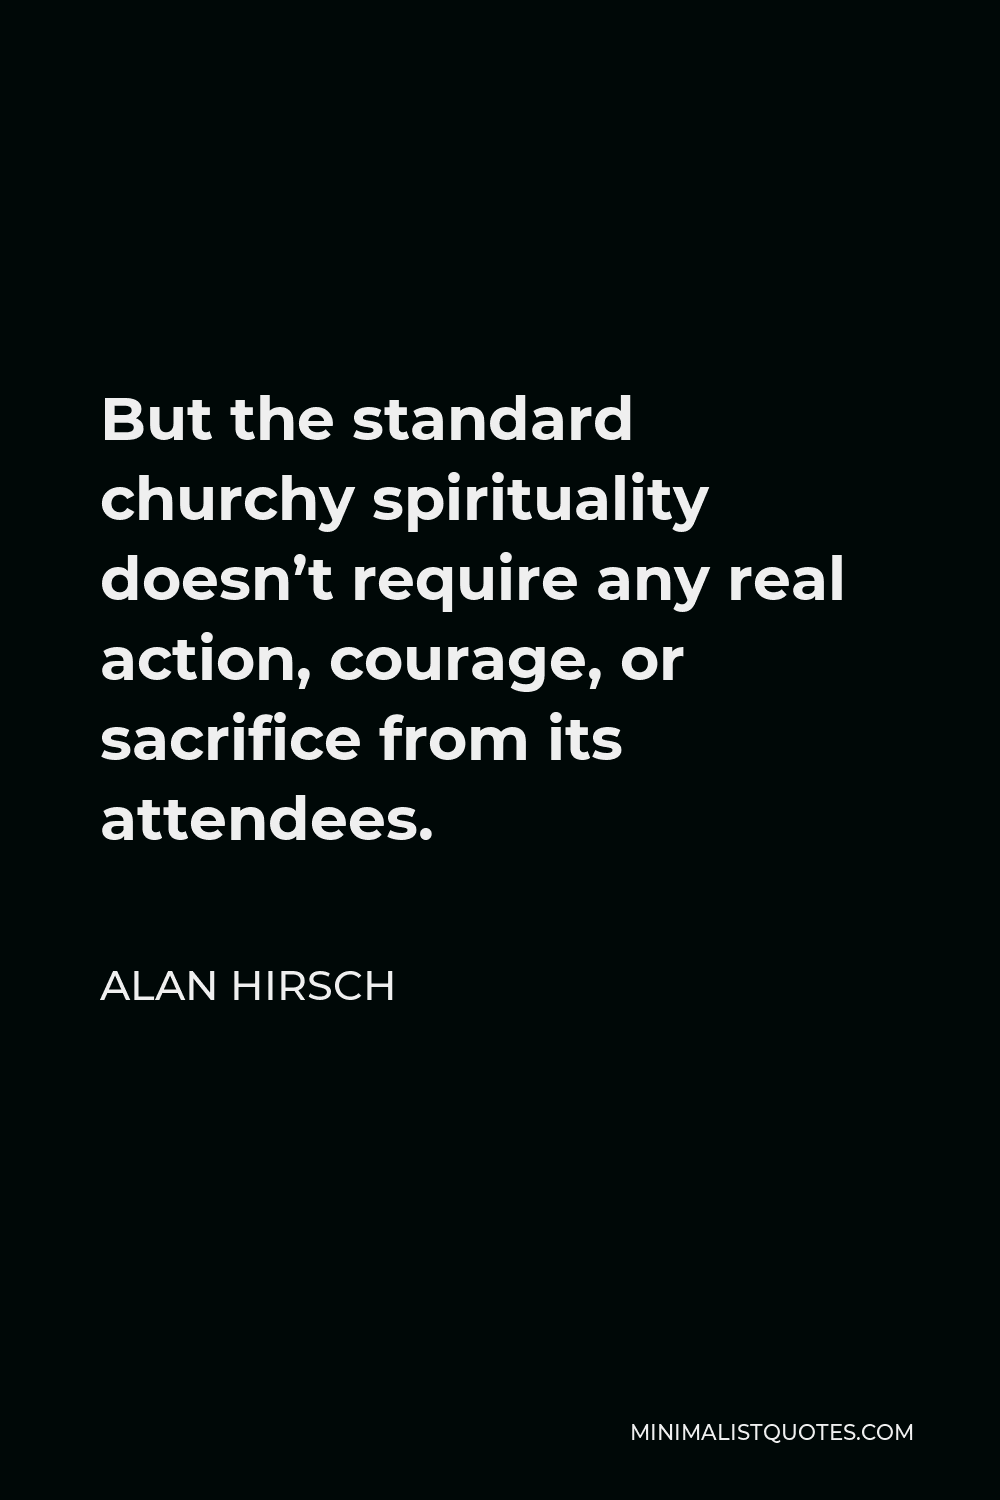 Alan Hirsch Quote - But the standard churchy spirituality doesn’t require any real action, courage, or sacrifice from its attendees.